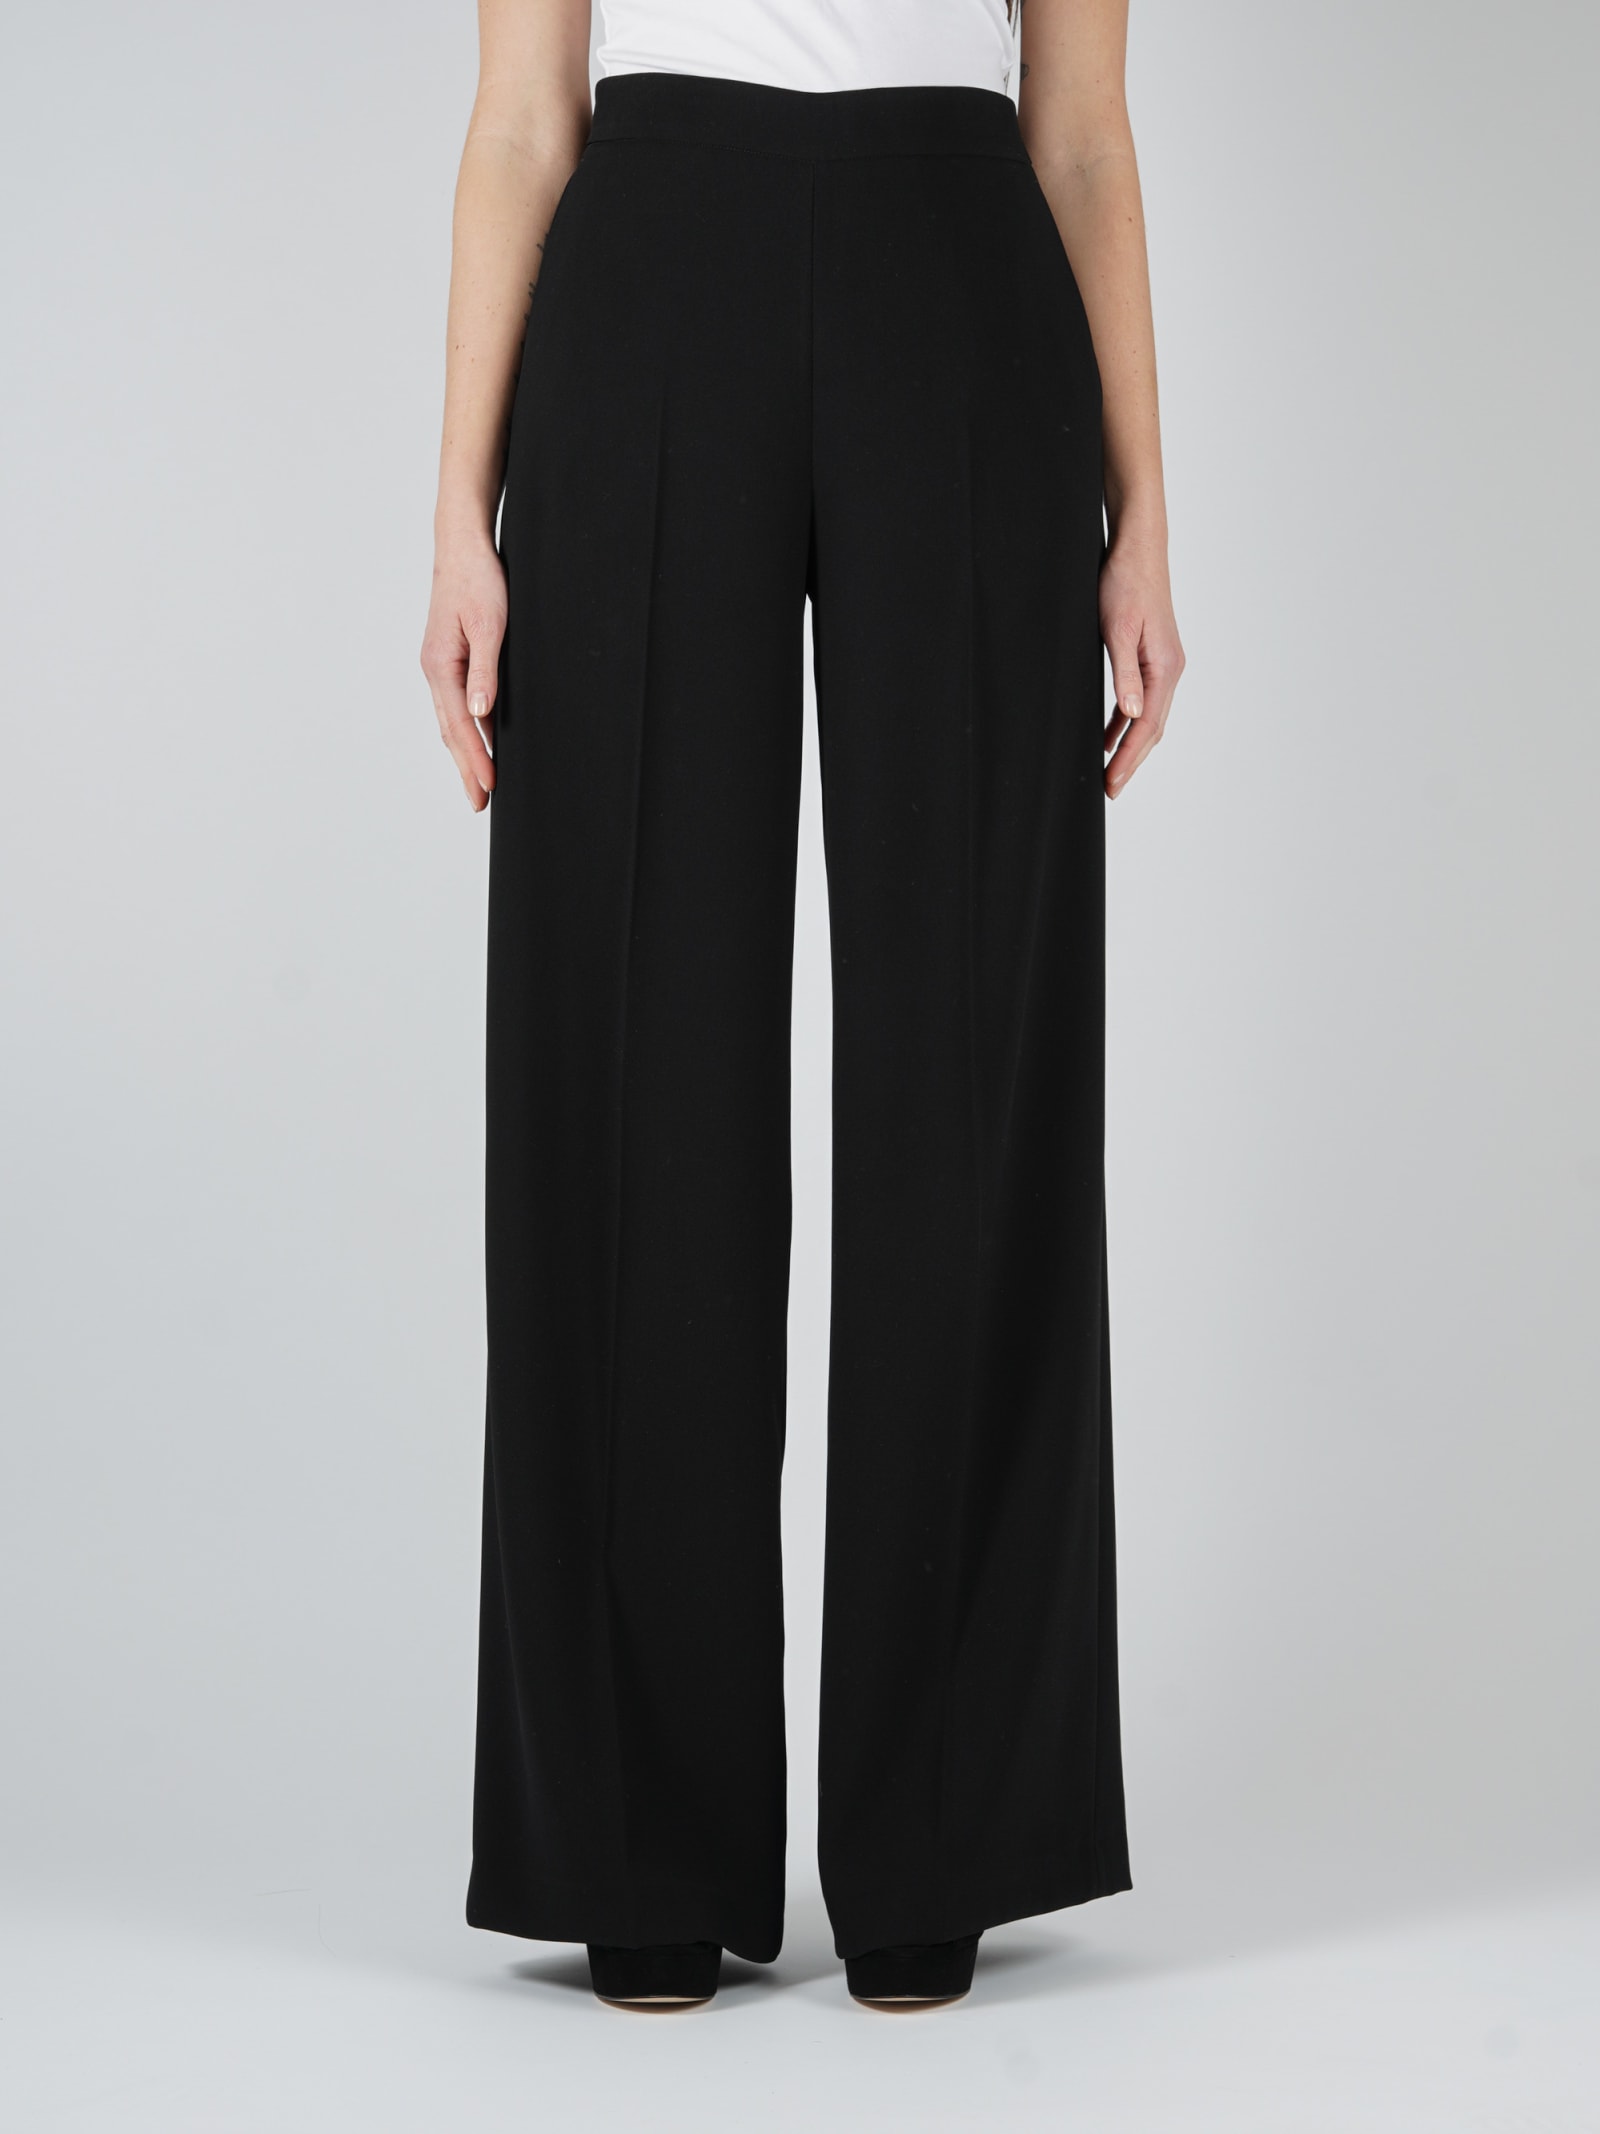 TwinSet Stretch Trousers